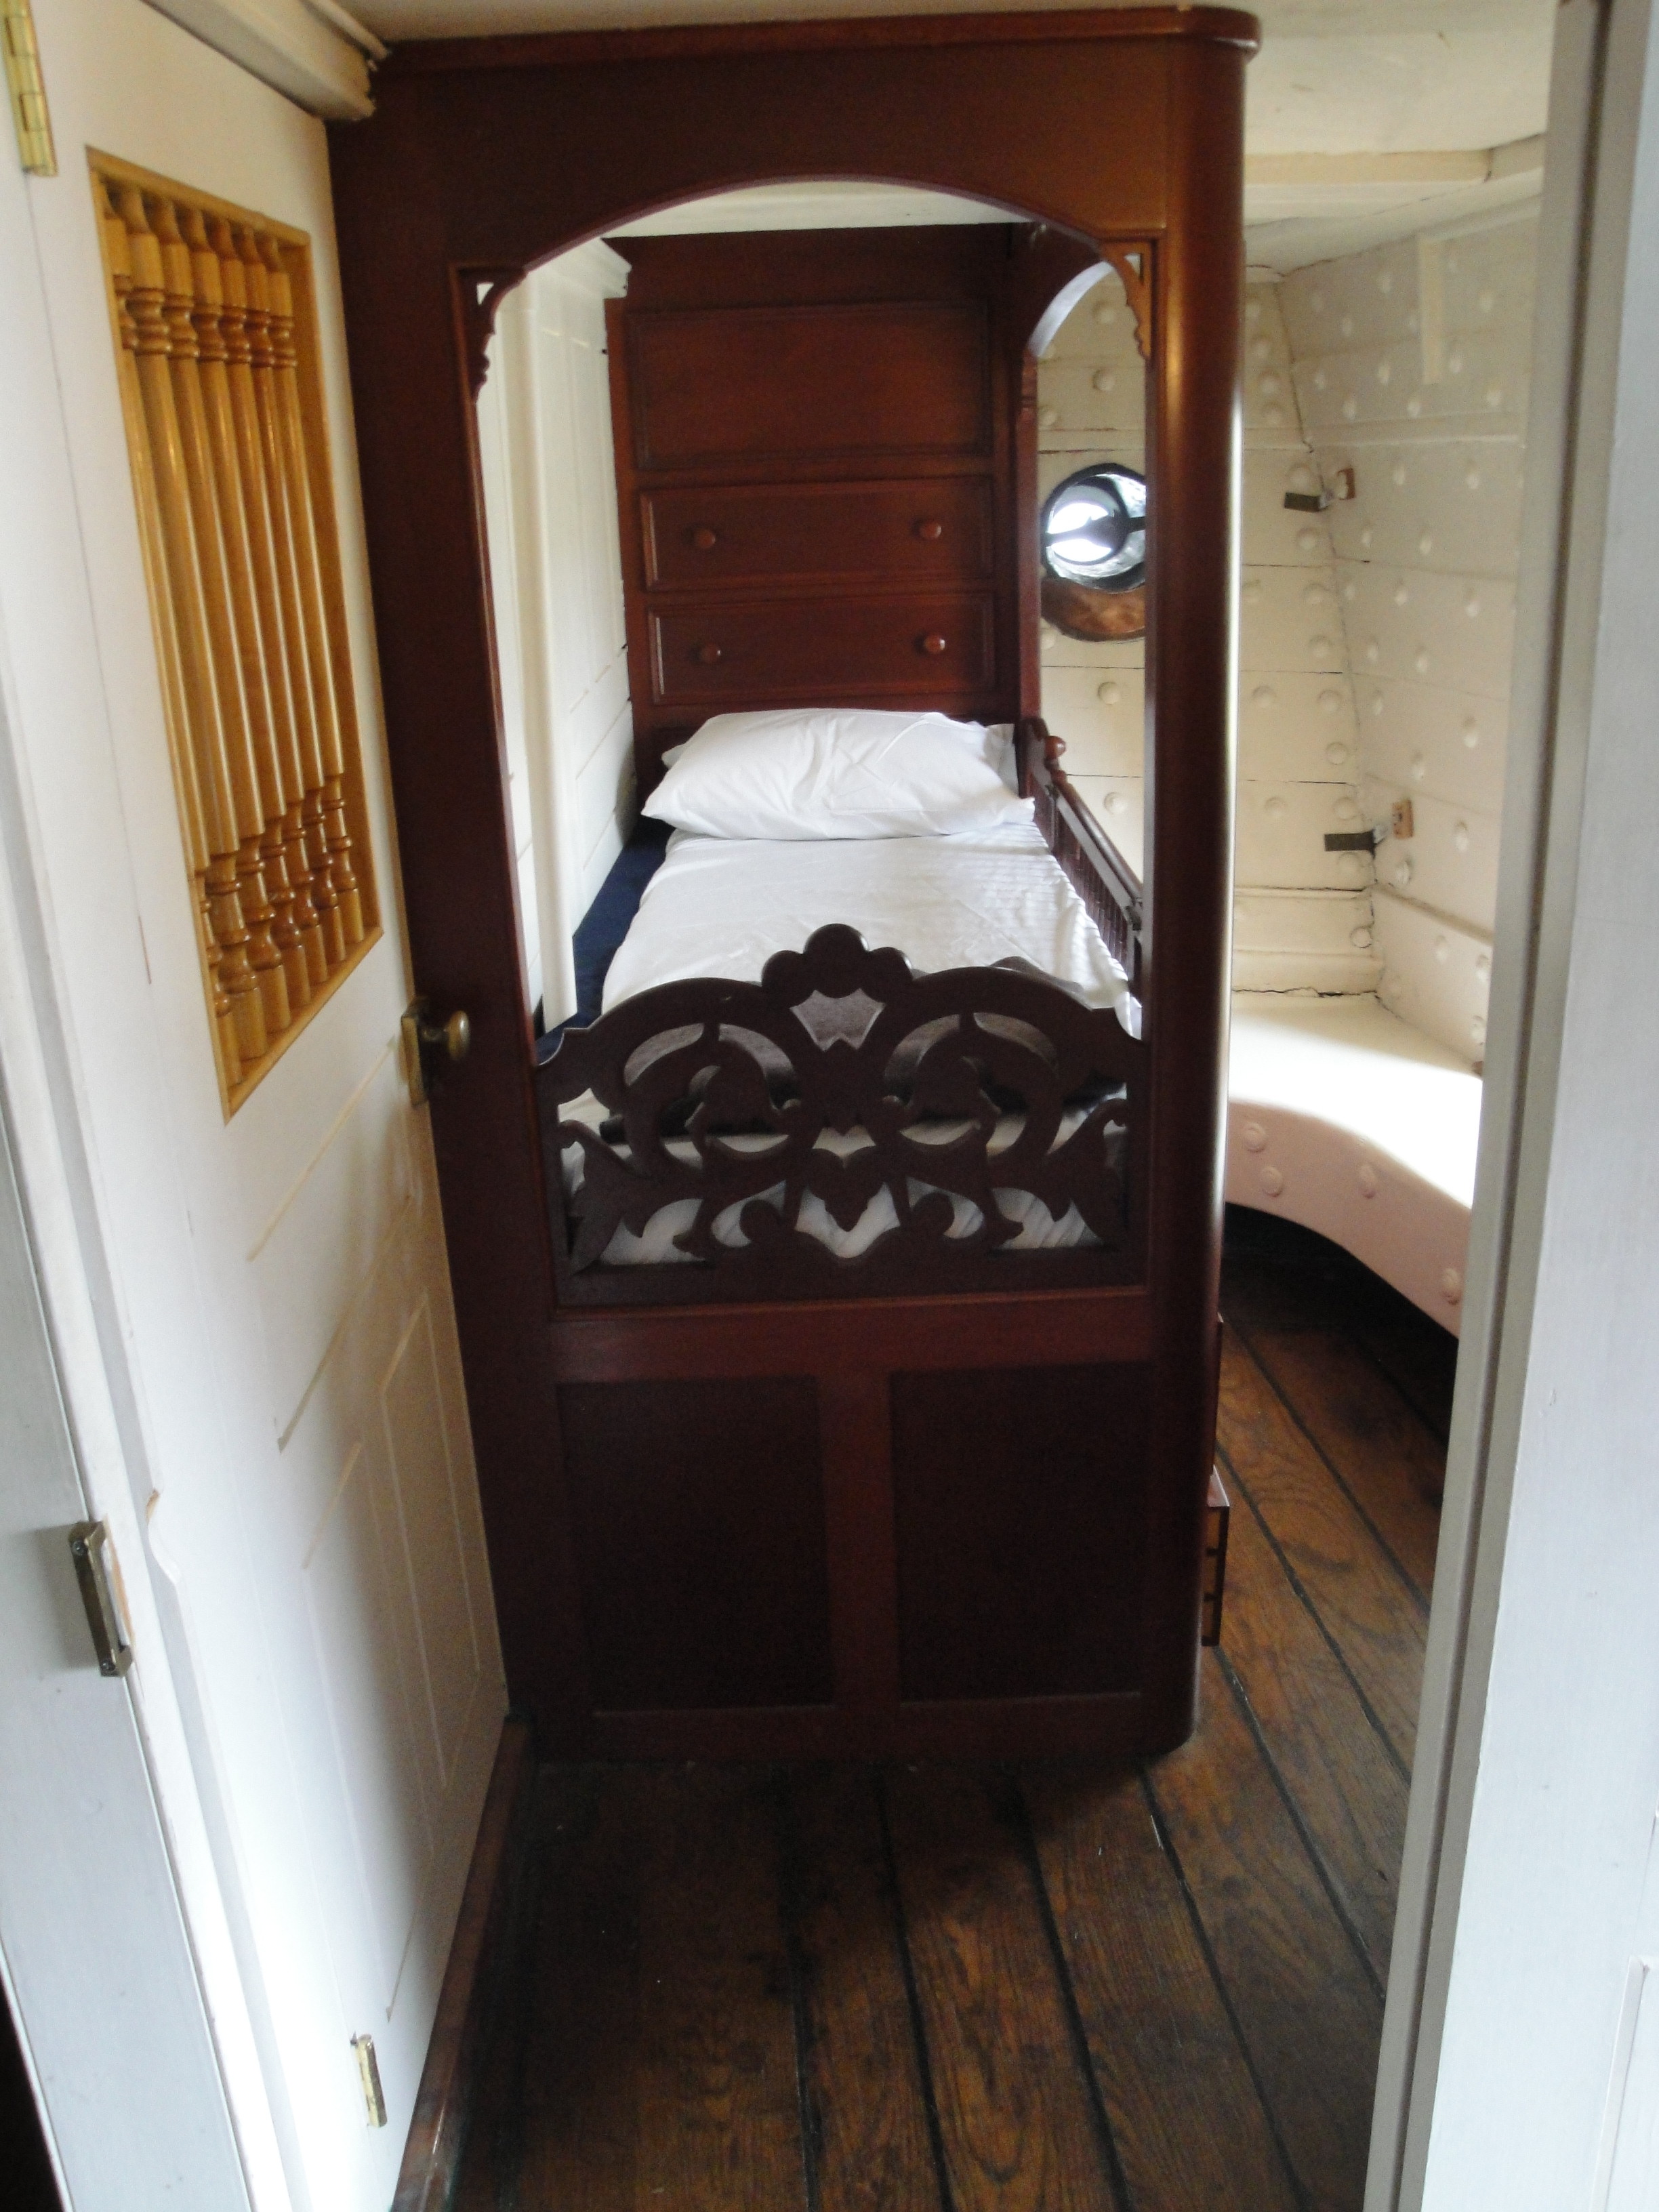 One of two mirror image cabins for the ship's captain or an embarked commodore. Glenn Moyer Photo